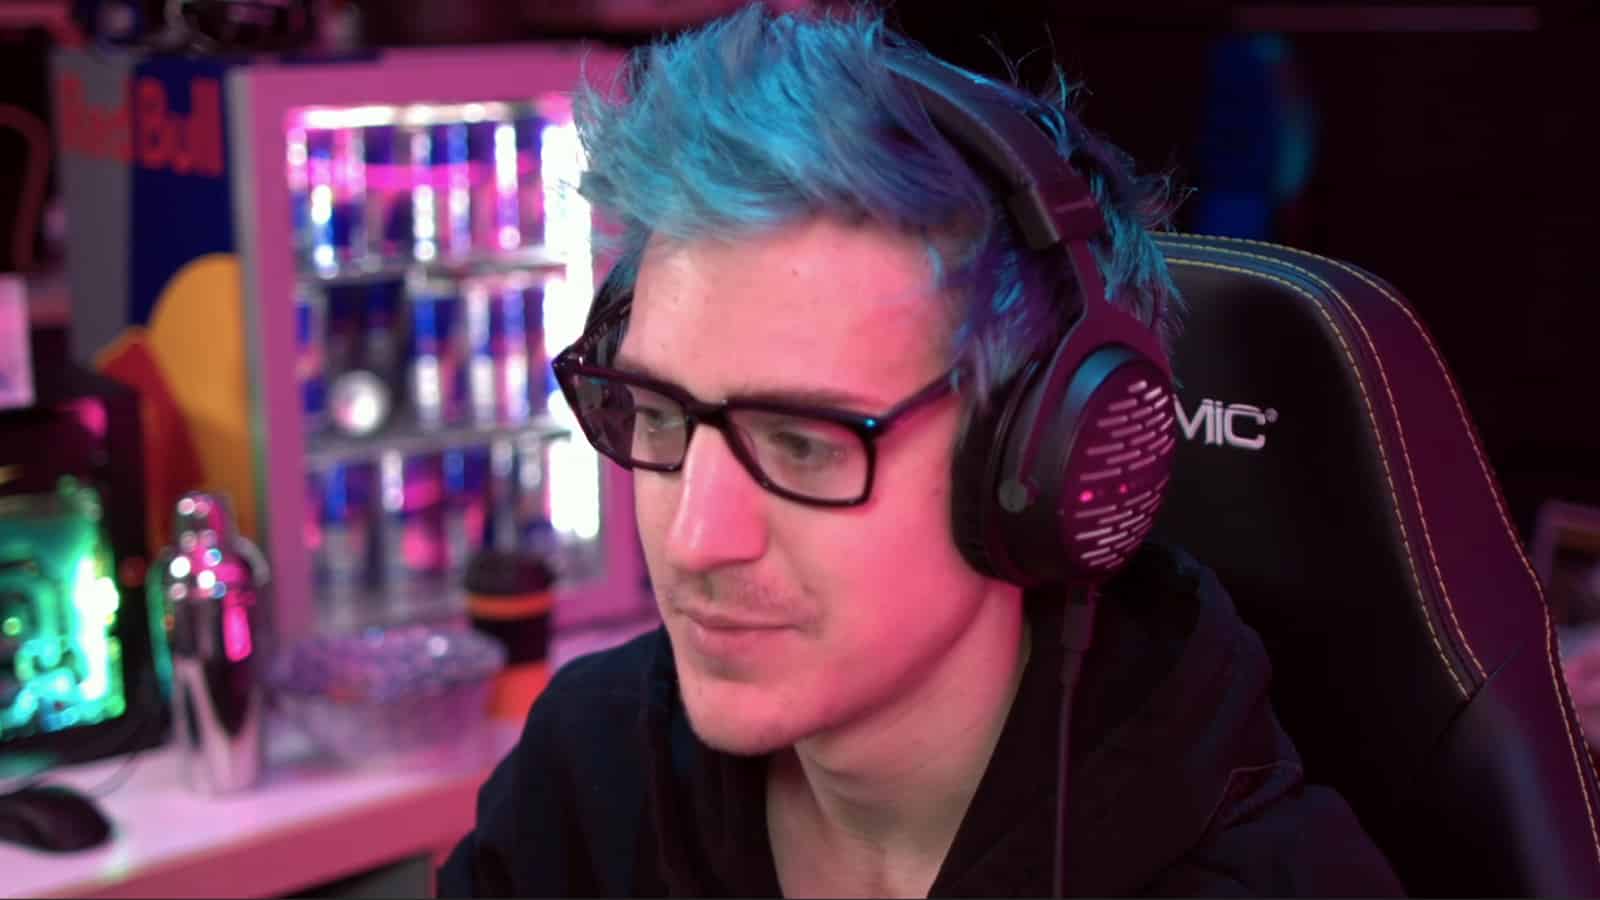 Ninja stares off-screen during a Twitch Fortnite stream.